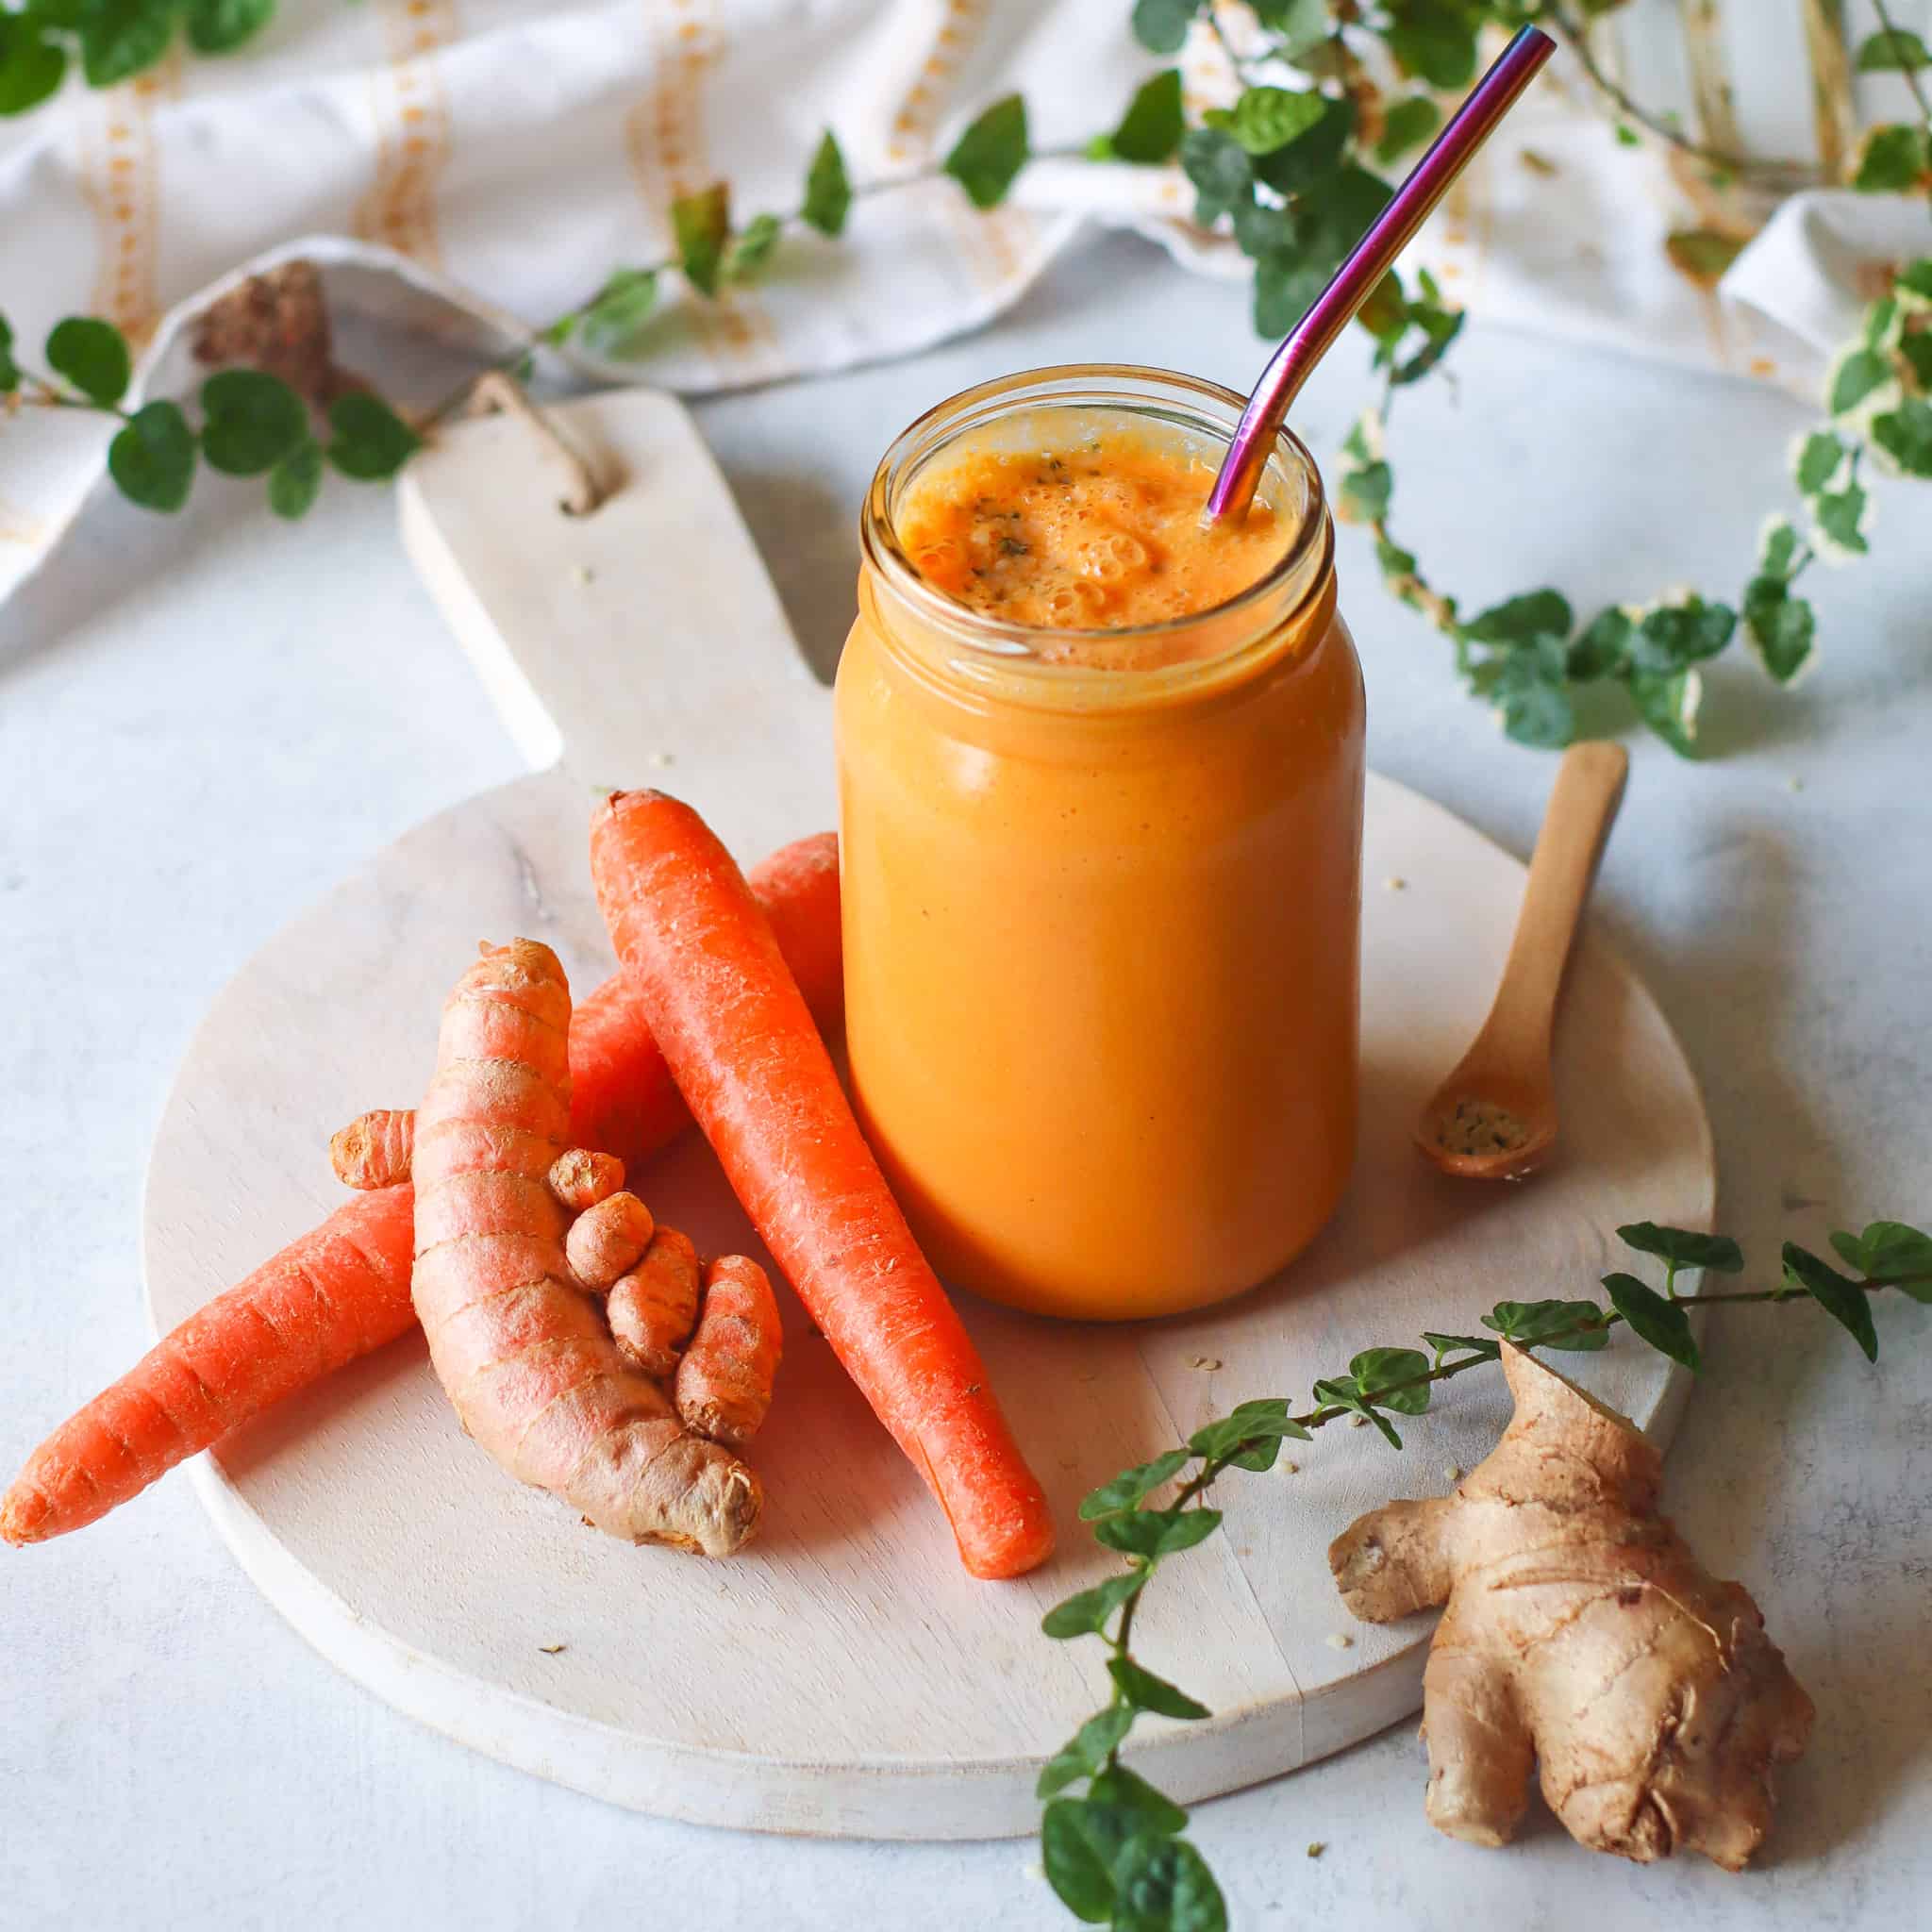 https://goodfoodbaddie.com/wp-content/uploads/2022/02/carrot-smoothie-with-turmeric-ginger-and-sea-moss-1.jpg